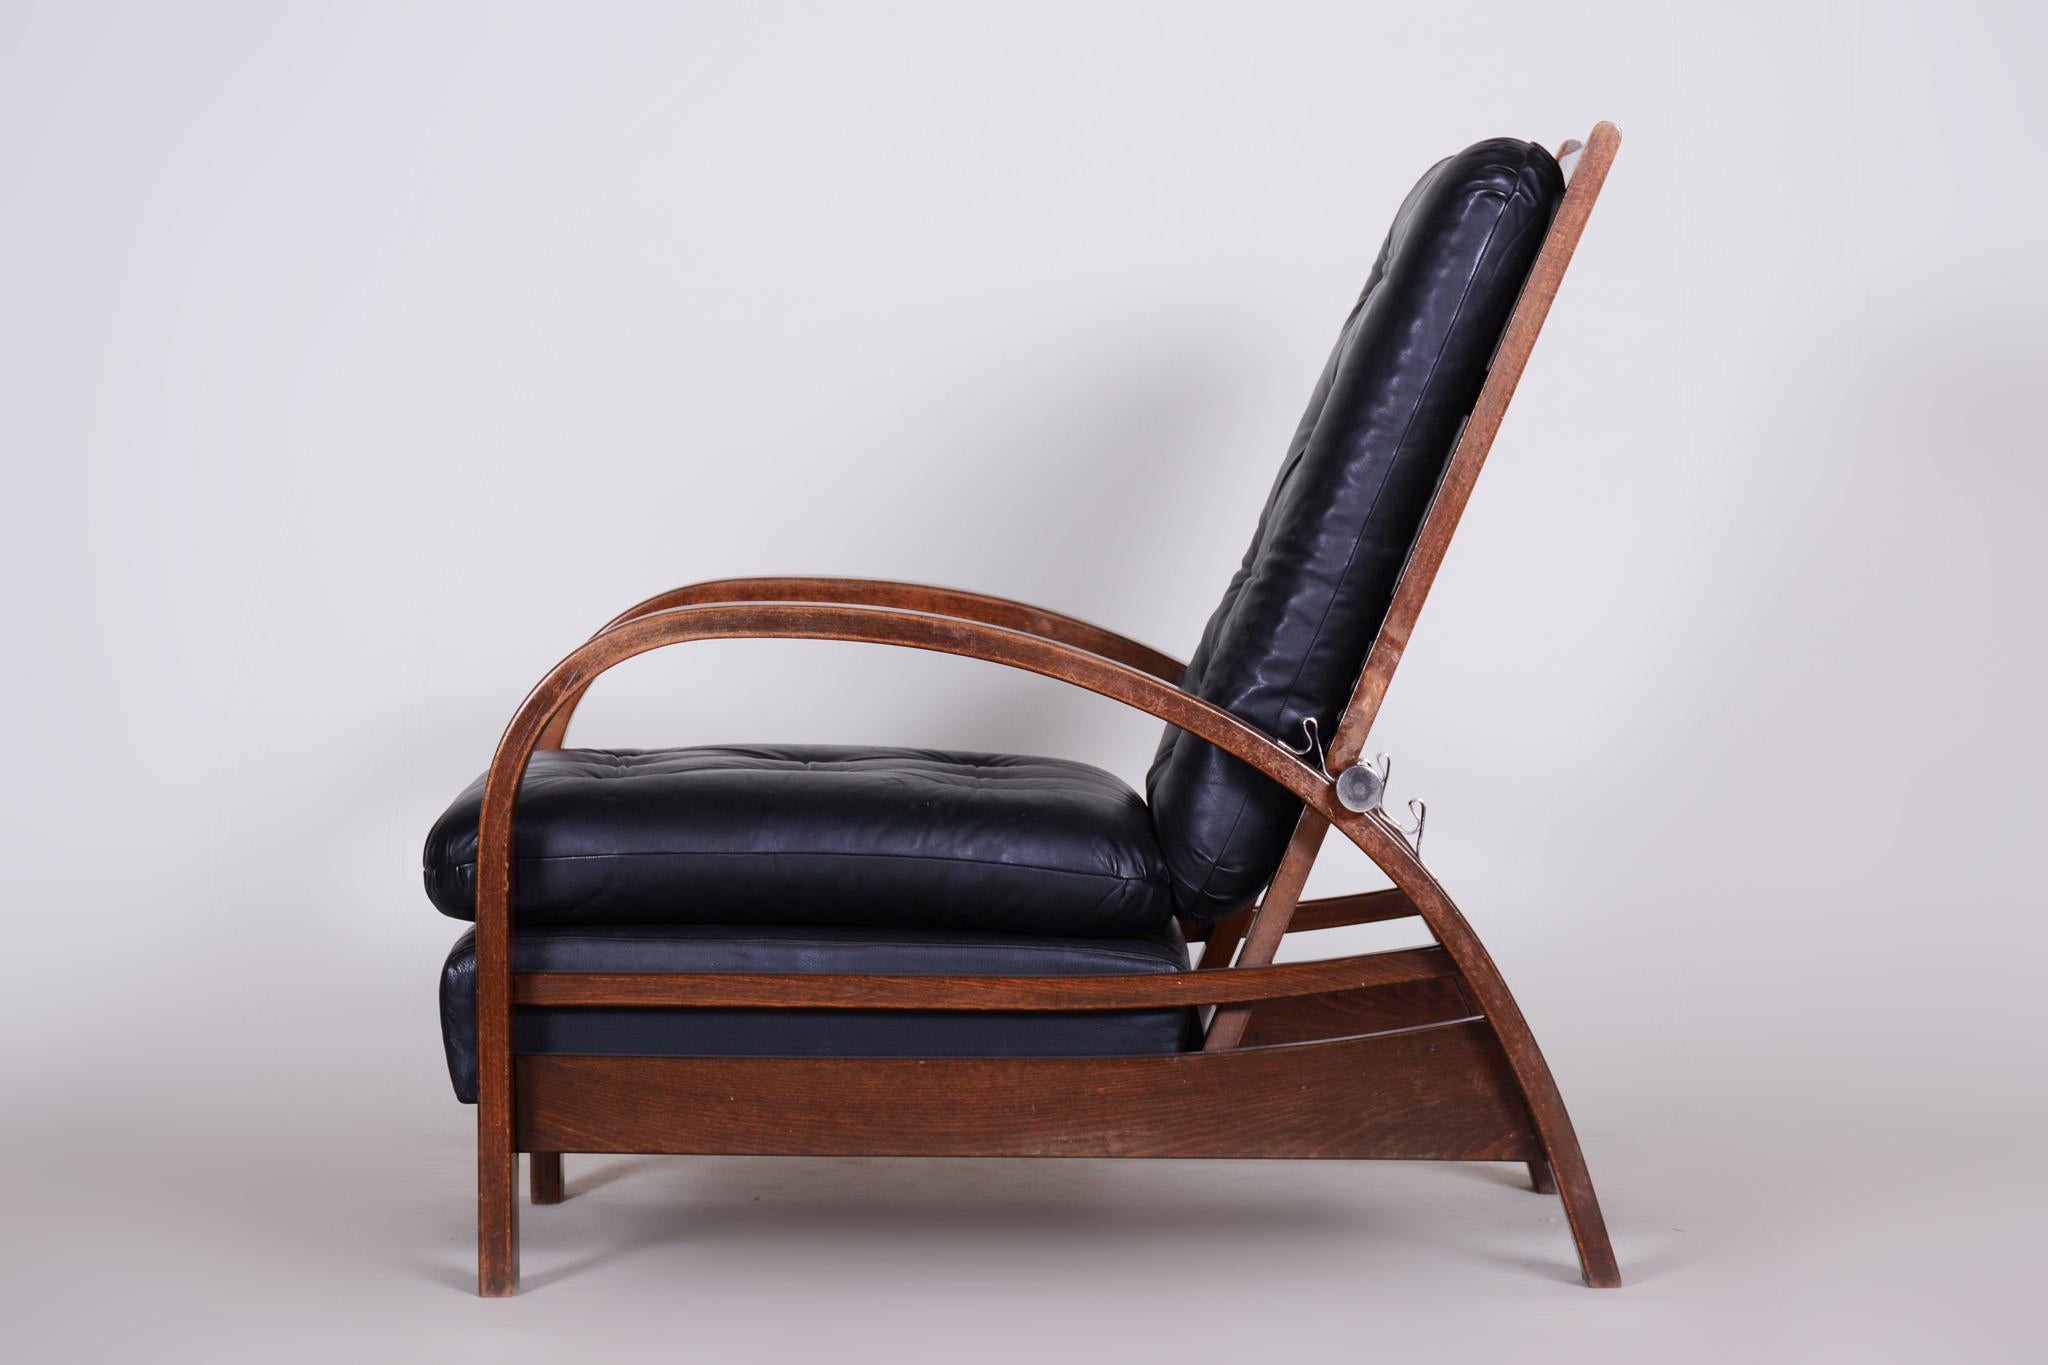 Upholstery Beech Art Deco Positioning Armchair, 1930s, Original Well Preserved Condition